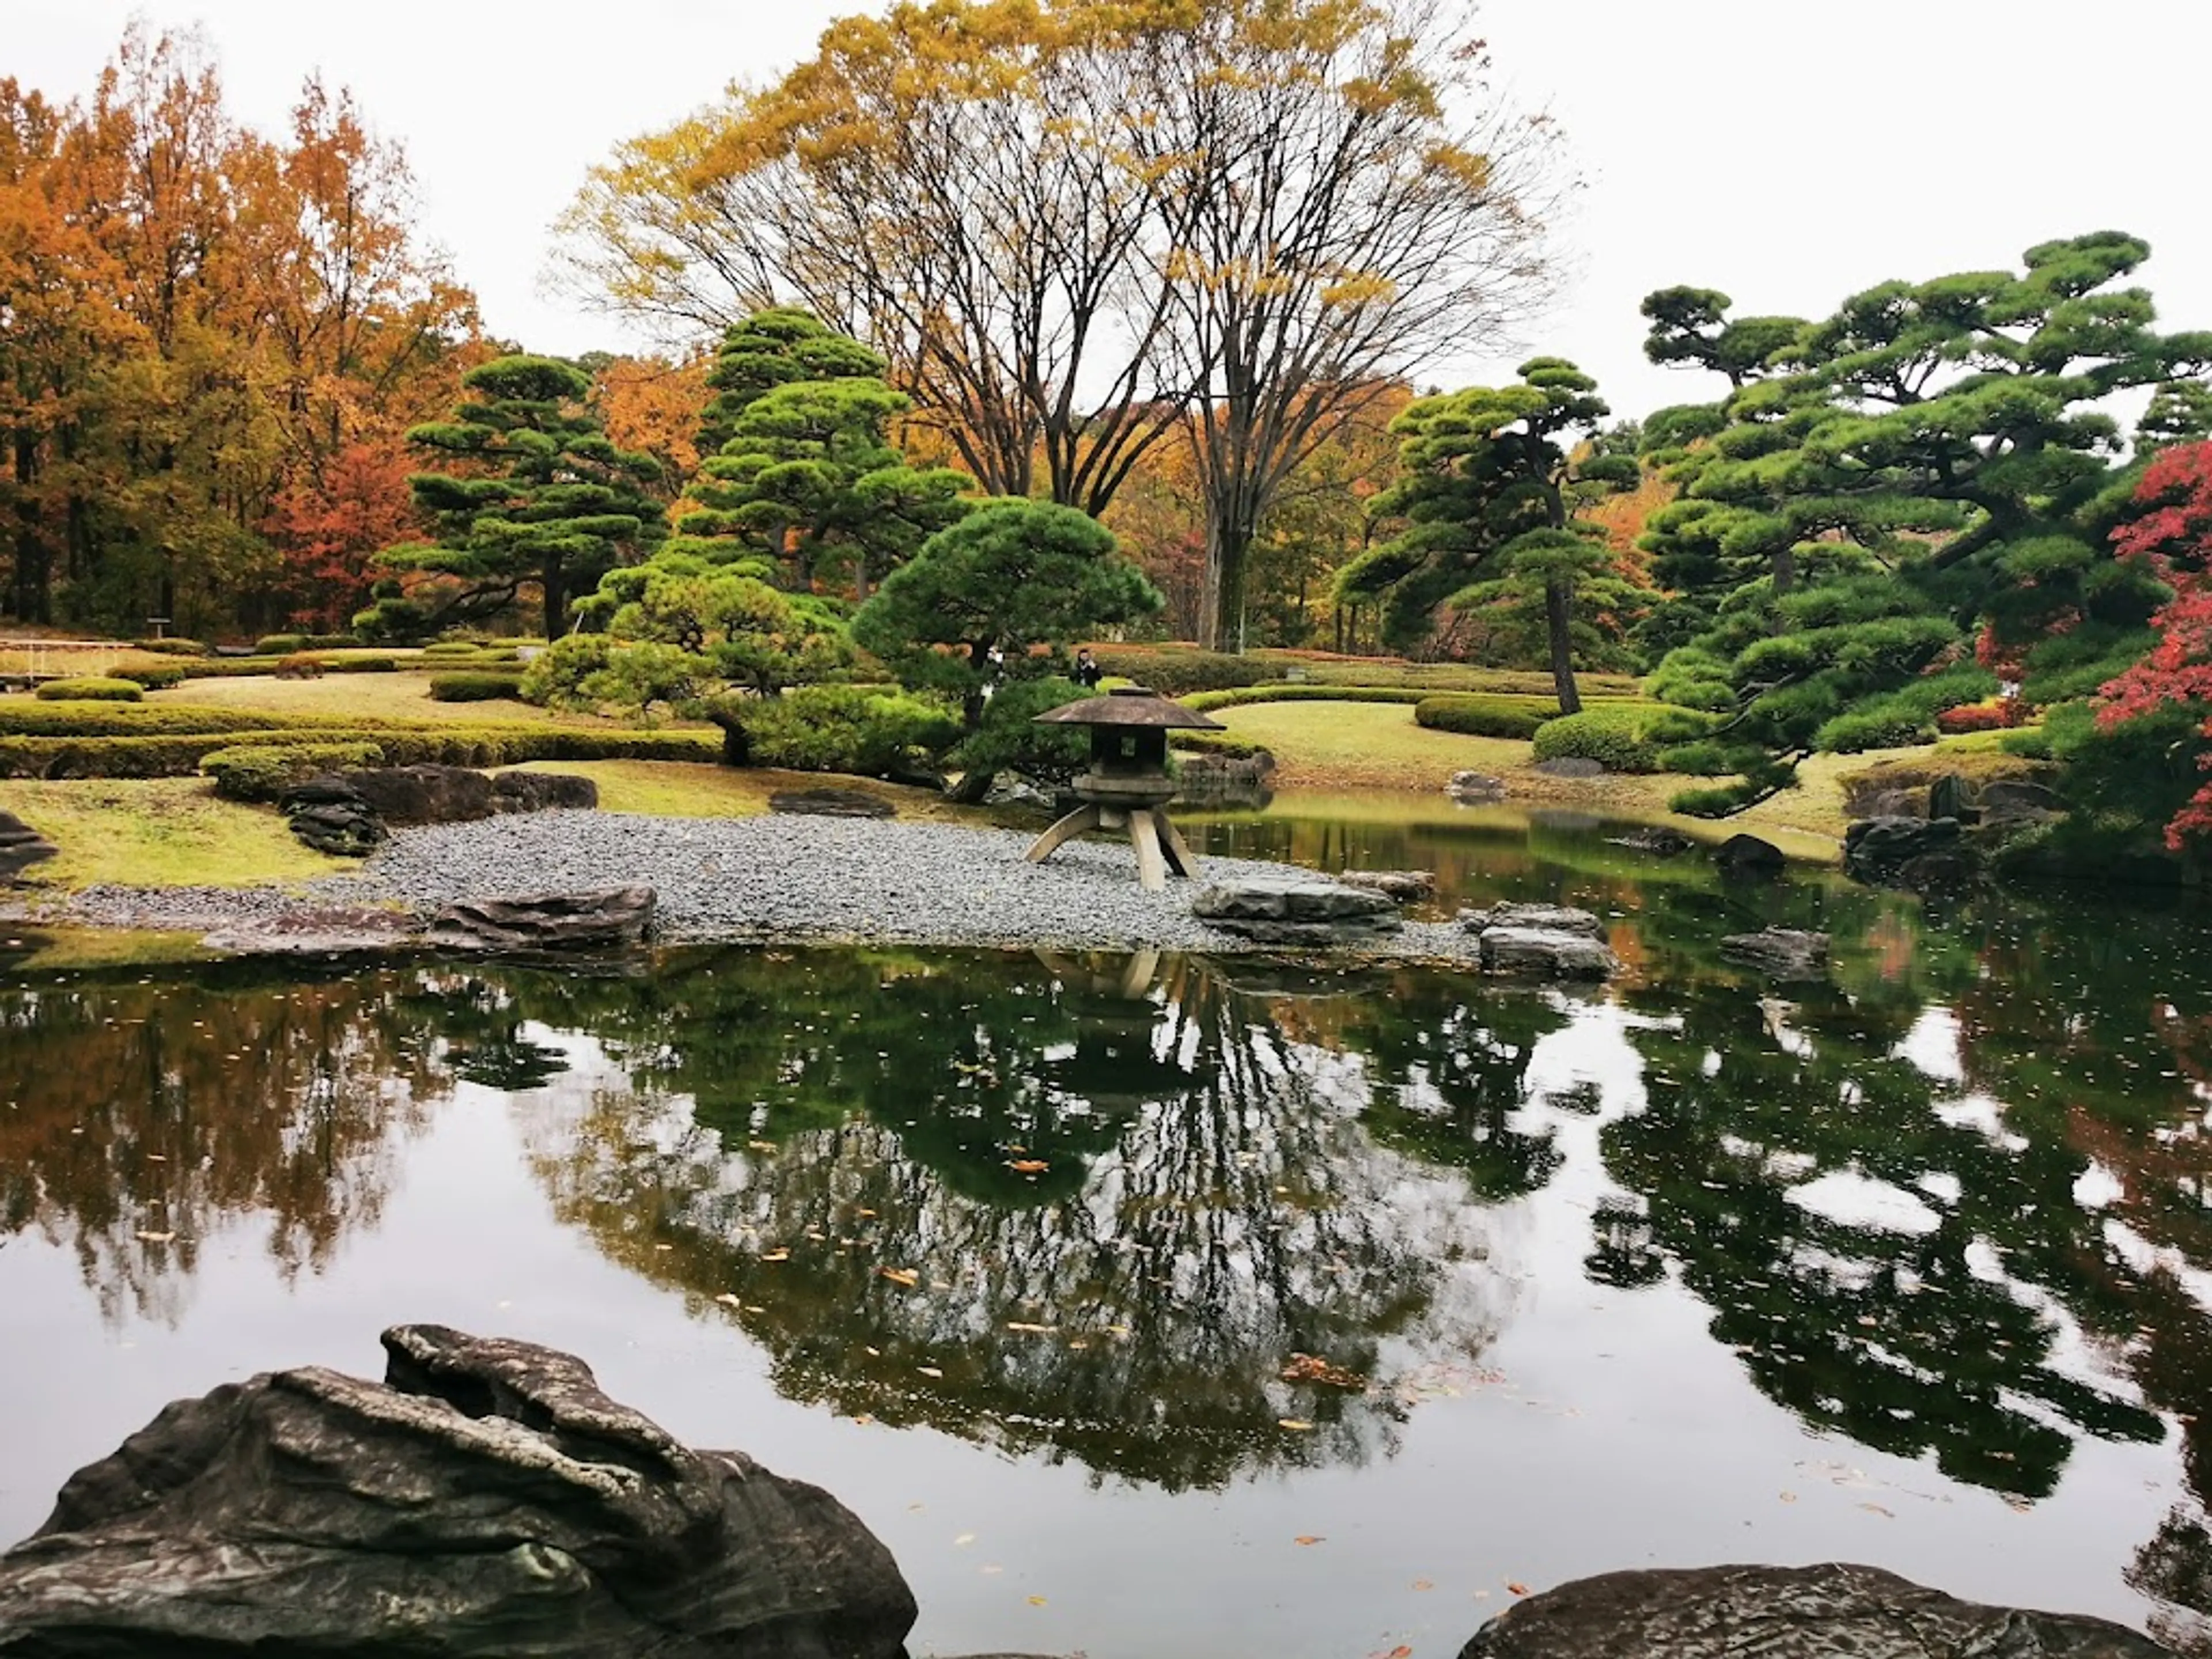 East Garden of the Imperial Palace